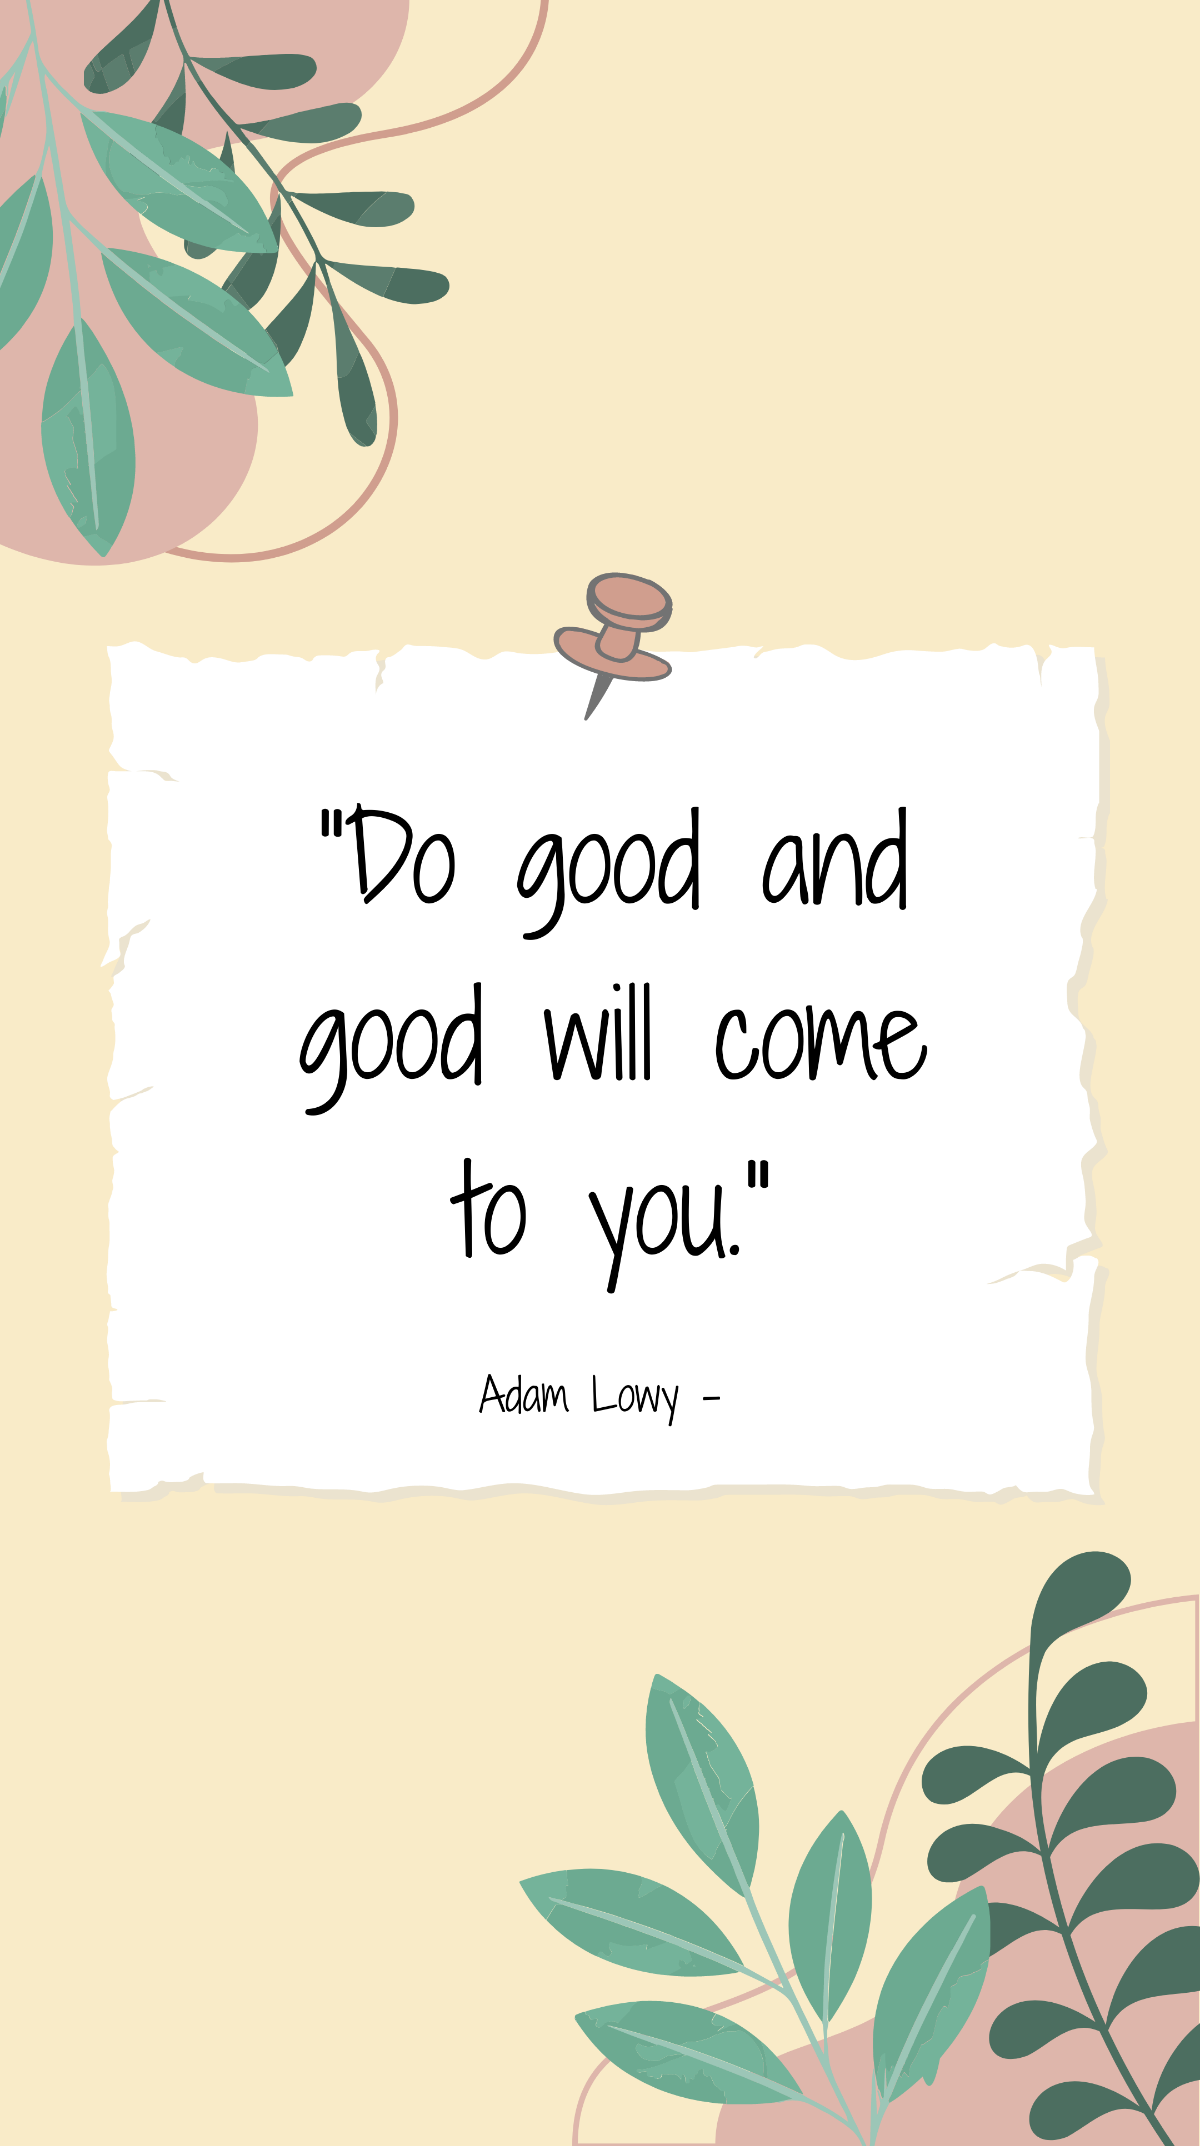 Adam Lowy - Do good and good will come to you. Template